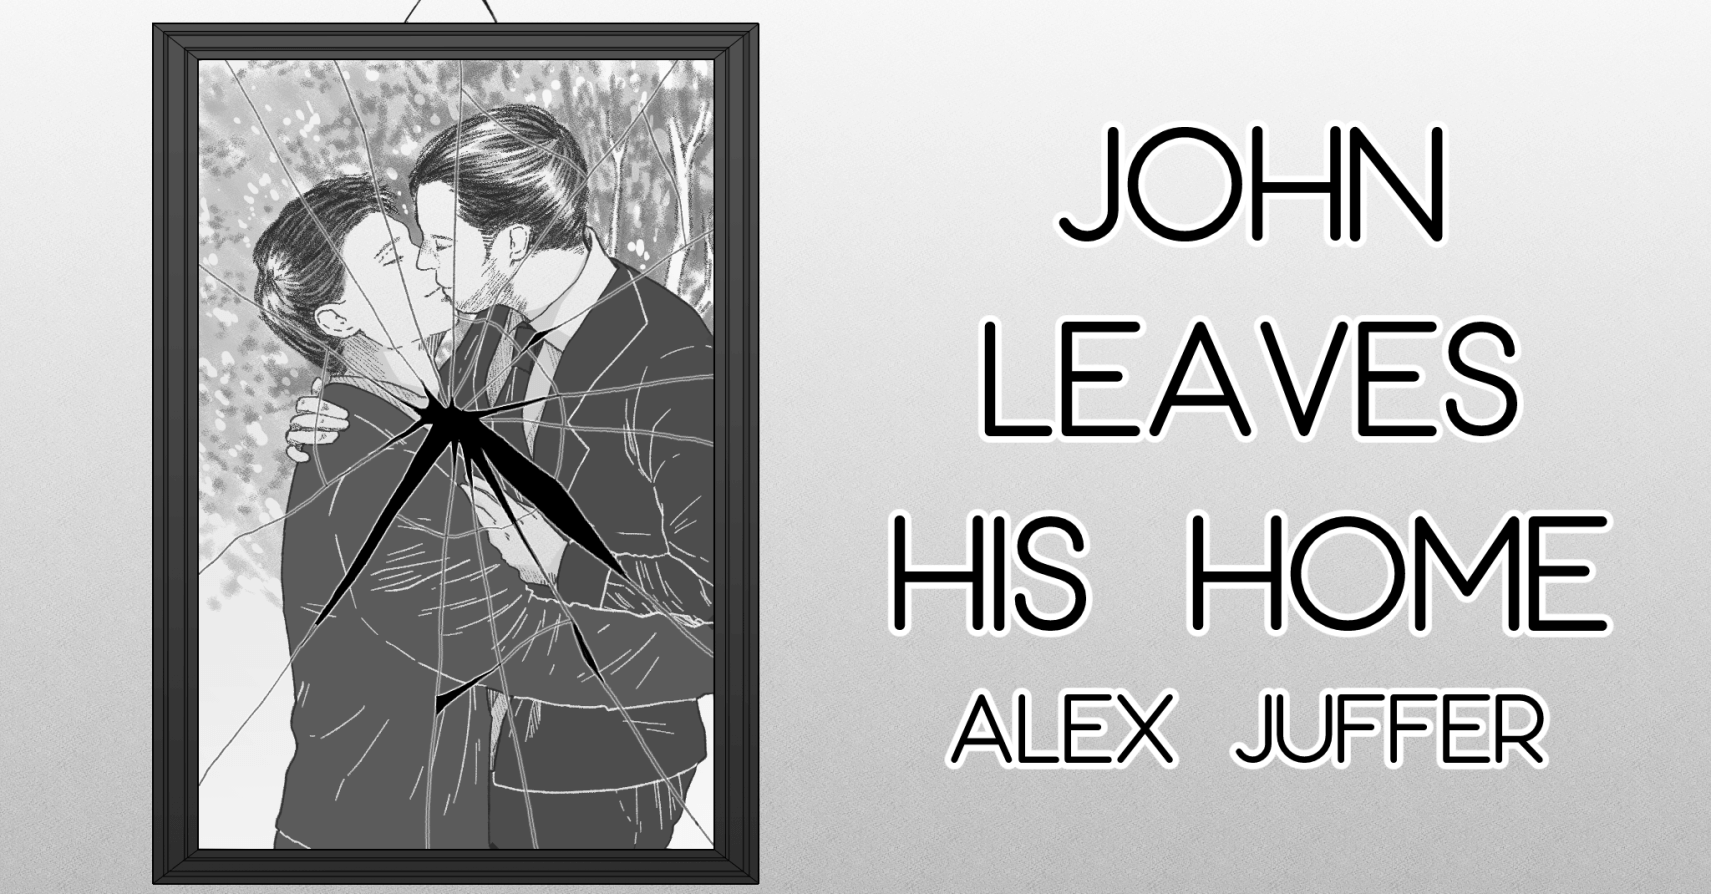 JOHN LEAVES HIS HOME by Alex Juffer